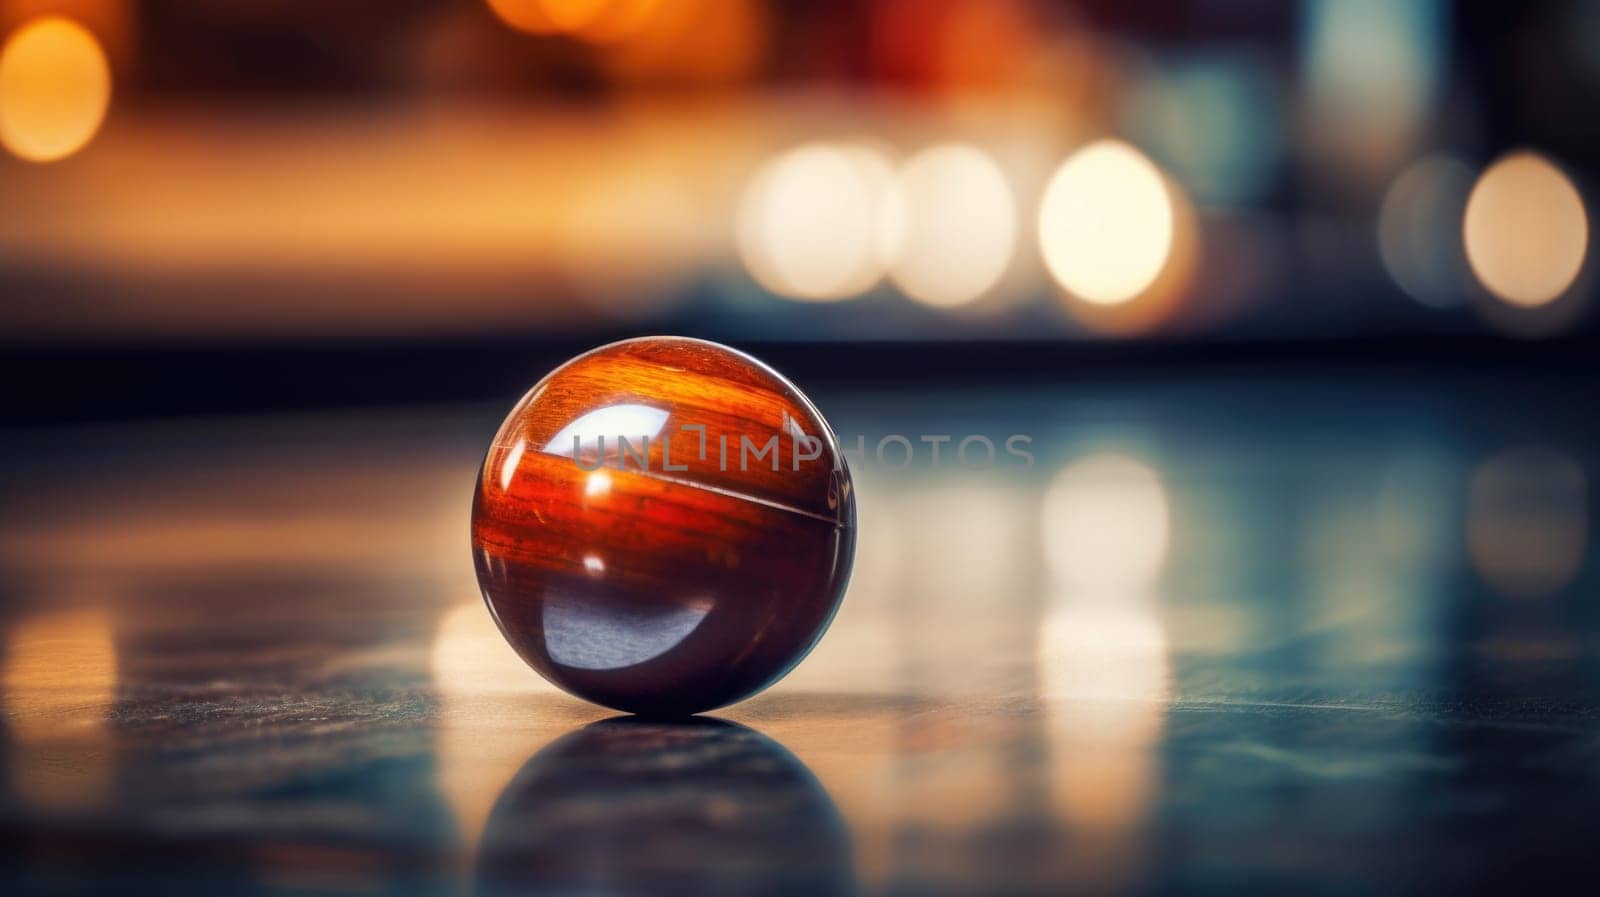 A wooden ball sitting on a table with blurry lights